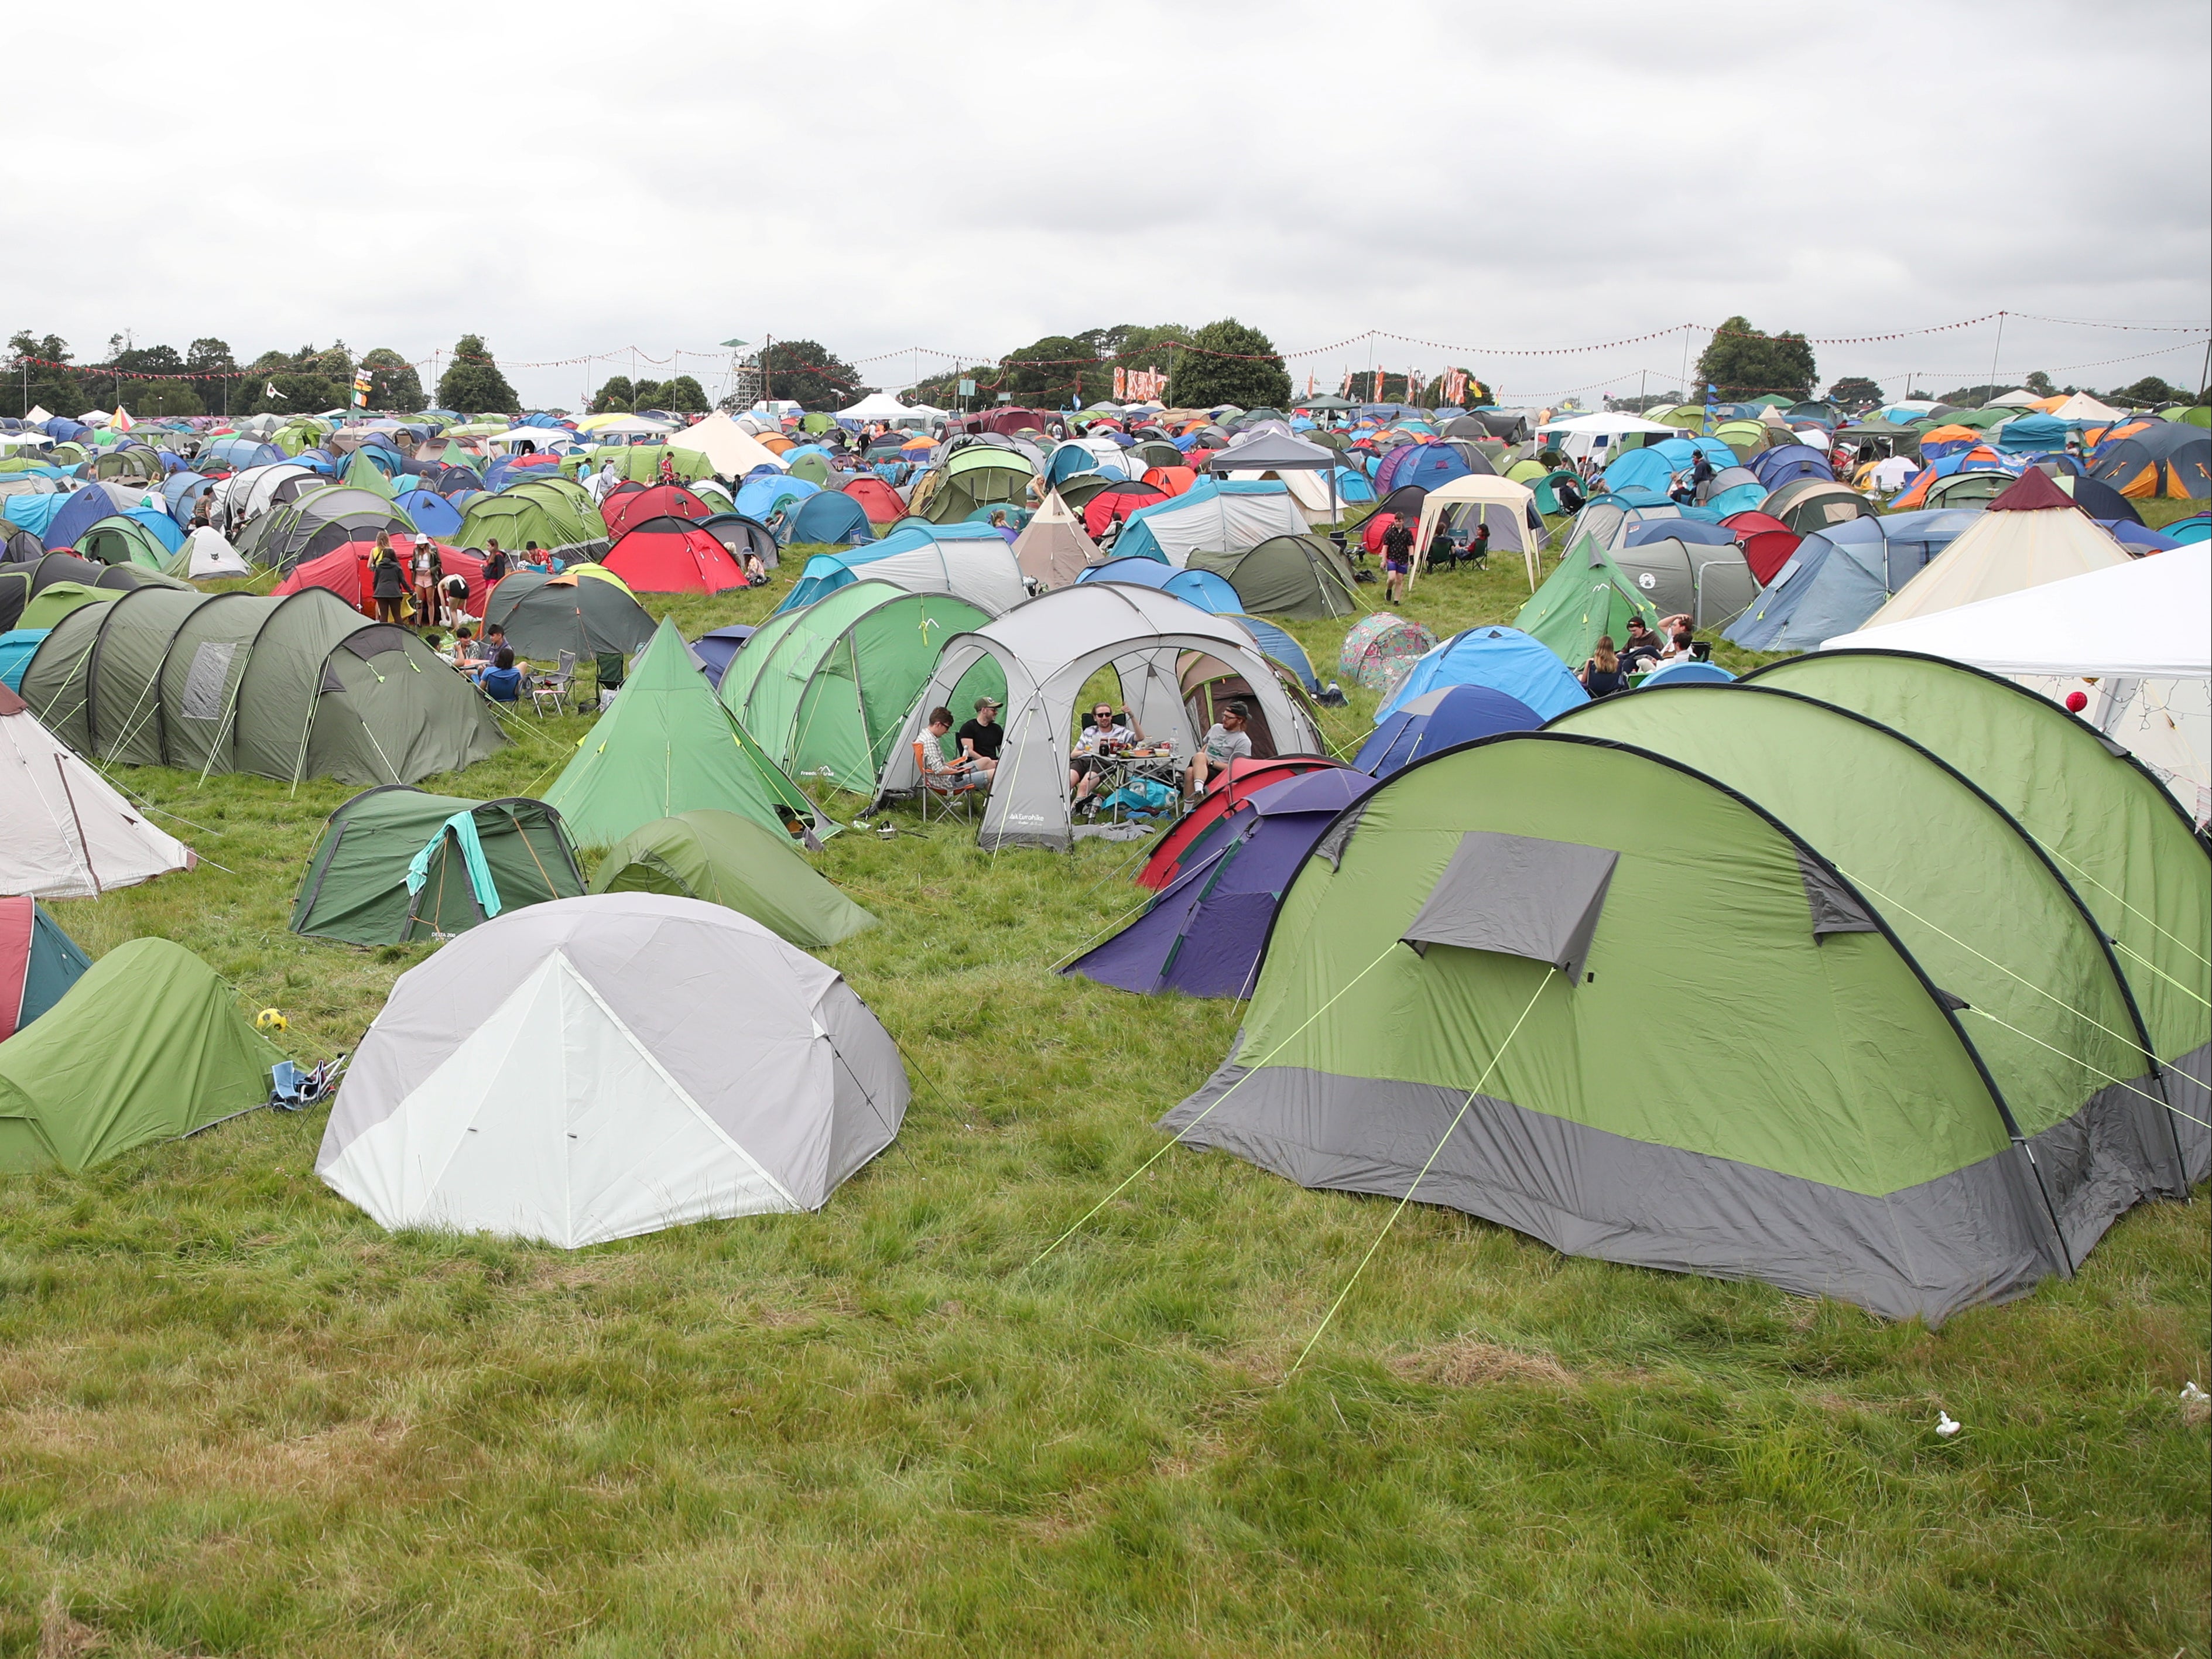 About 40,000 people are heading south to Latitude festival which is operating under a government event safety trial